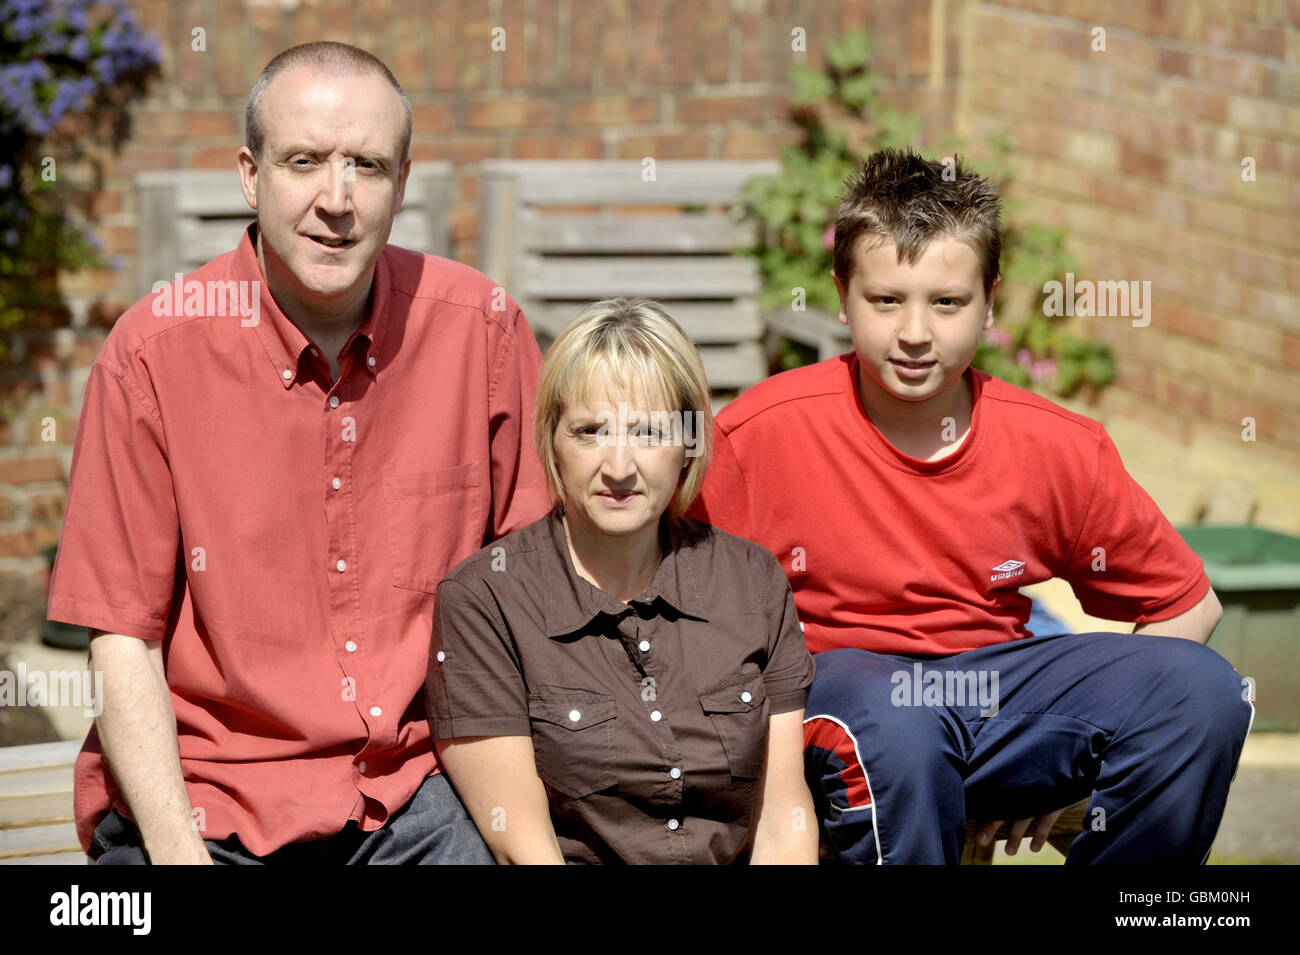 Barry Greatorex, 43, from Chipping Sodbury, in South Gloucestershire, stands at his garden gate with his wife Fran, 46, and son Jamie, 13, as he is stuck at home under quarantine with a confirmed case of swine flu. Stock Photo